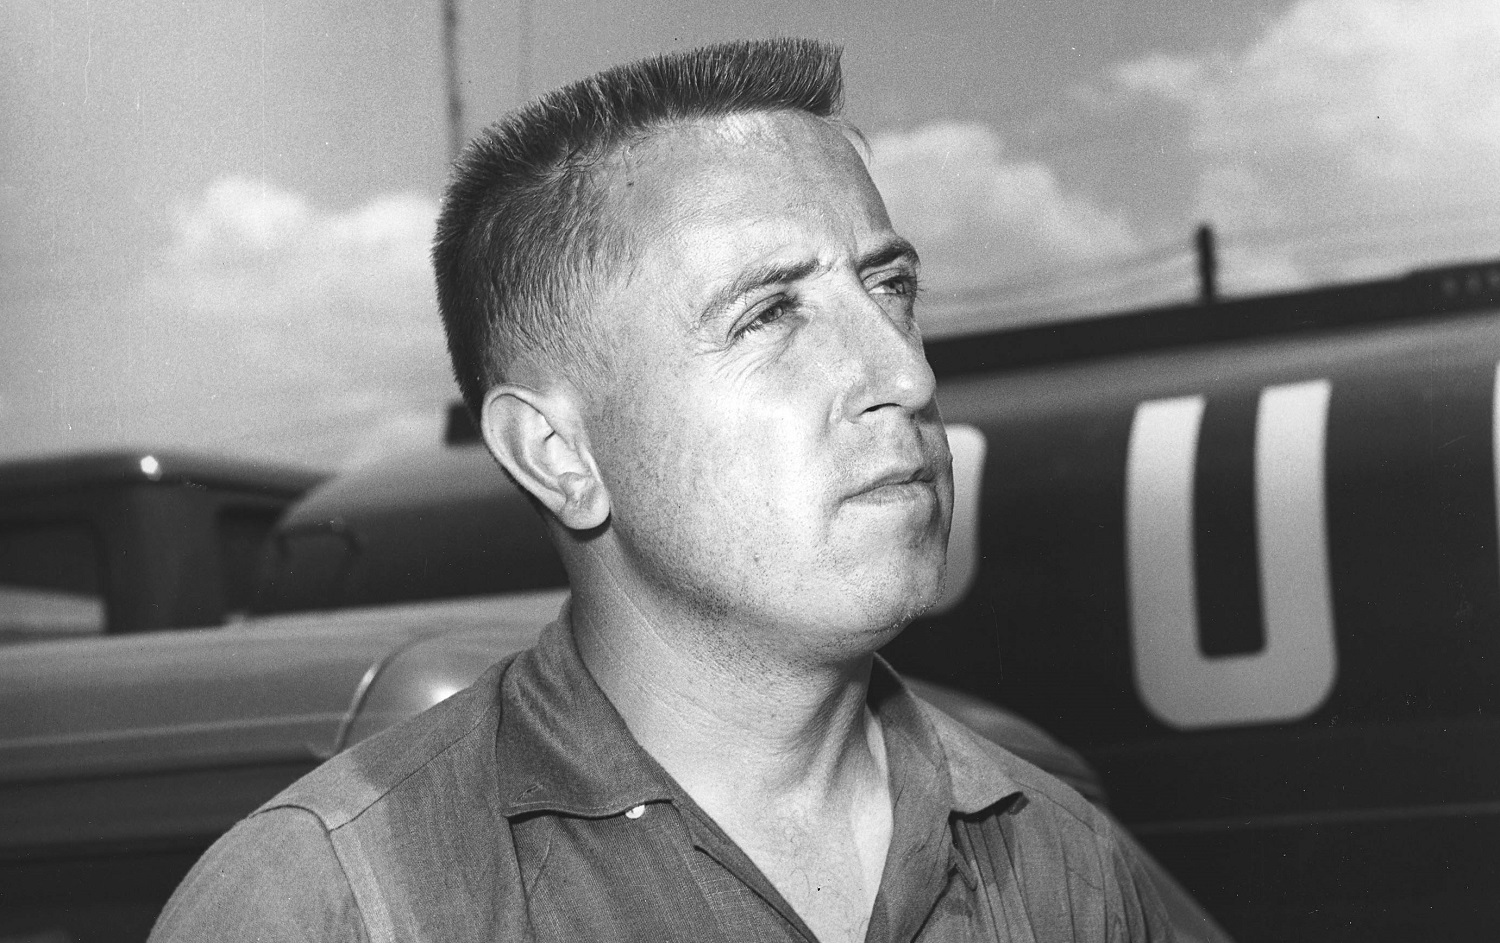 Rex White entered 233 NASCAR Cup races from 1956 through 1964, scoring 28 wins and the 1960 Cup championship.